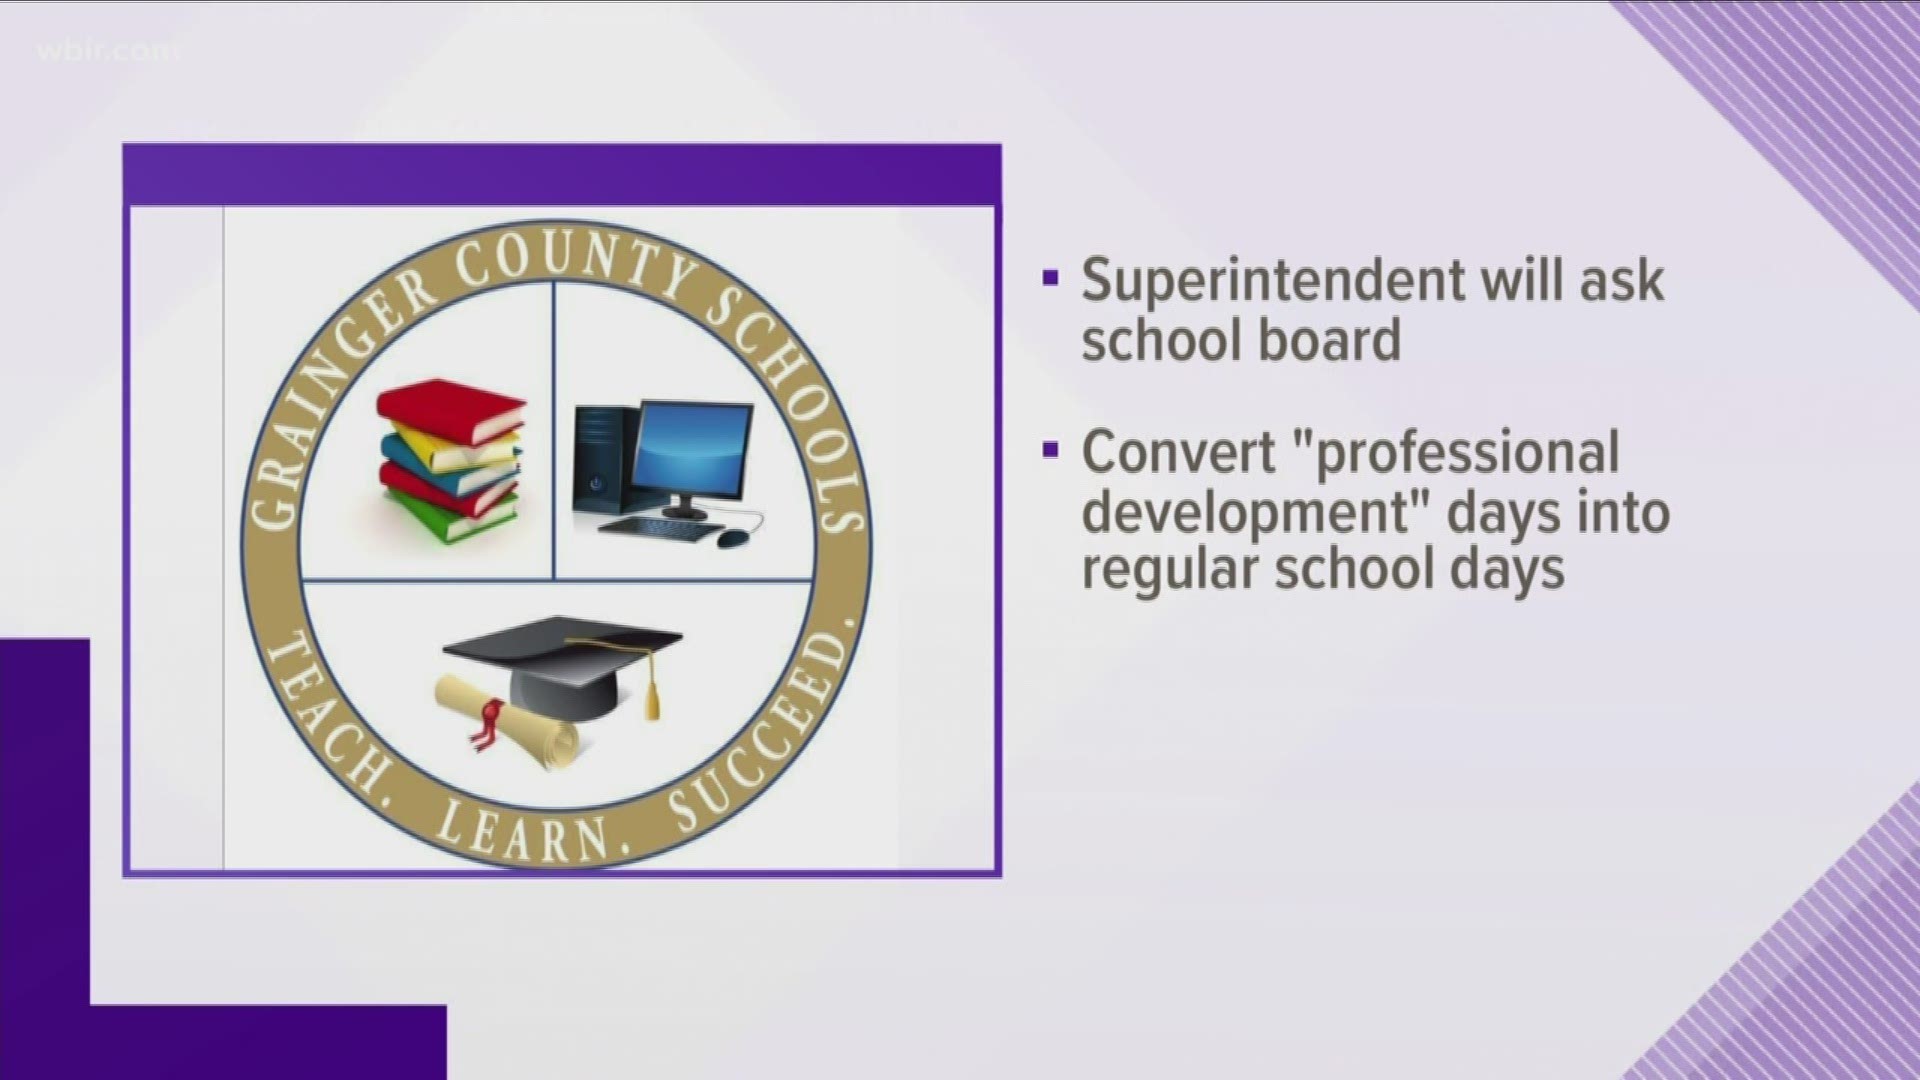 The superintendent says he will ask the school board to convert some professional development days into regular school days.